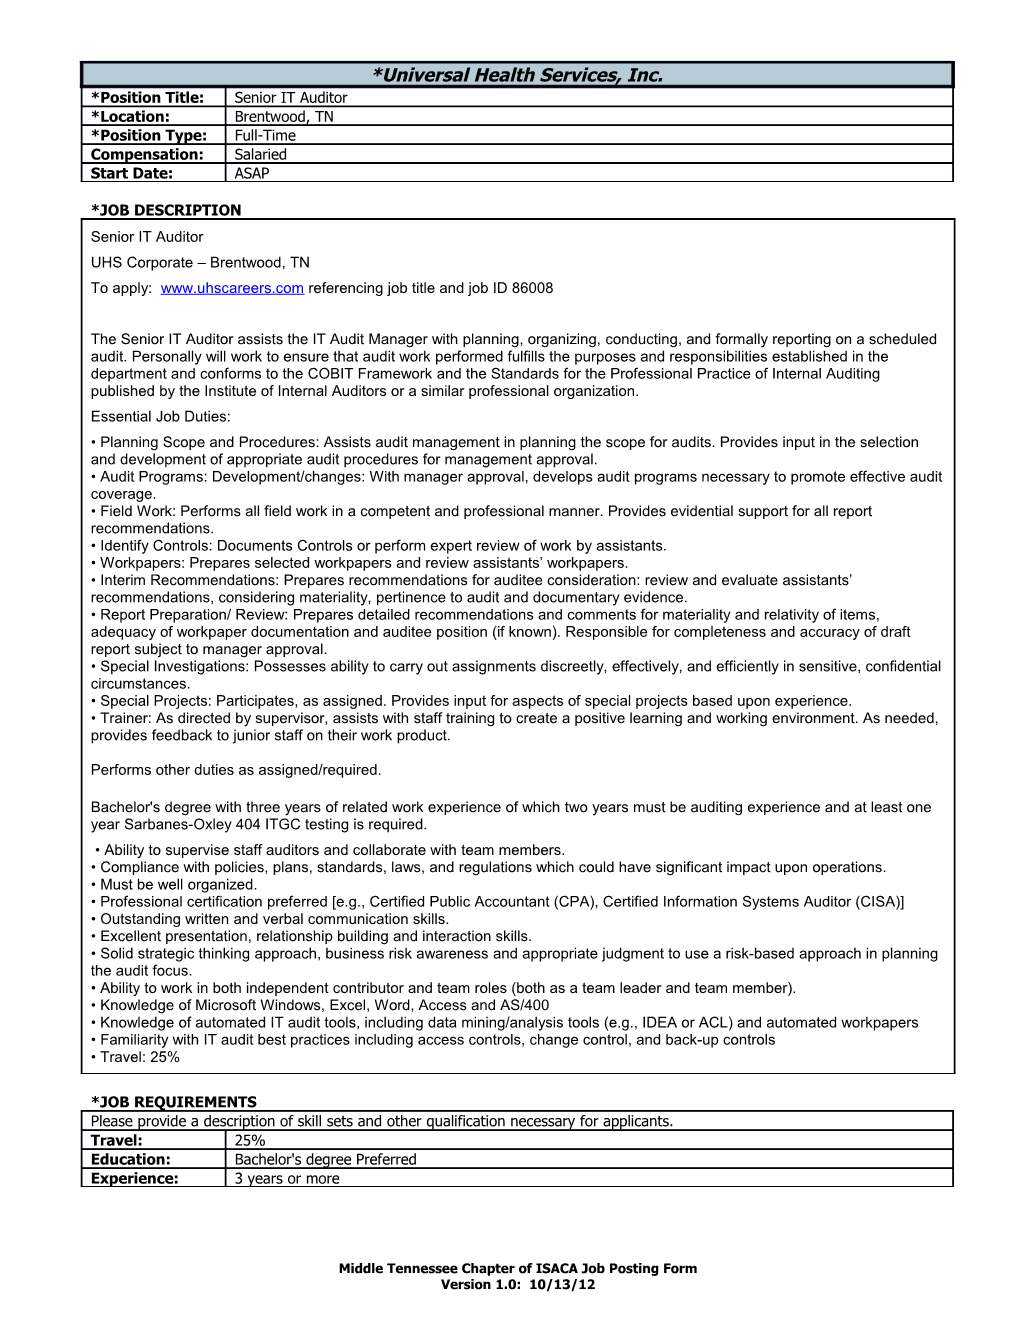 Middle Tennessee Chapter of ISACA Job Posting Form